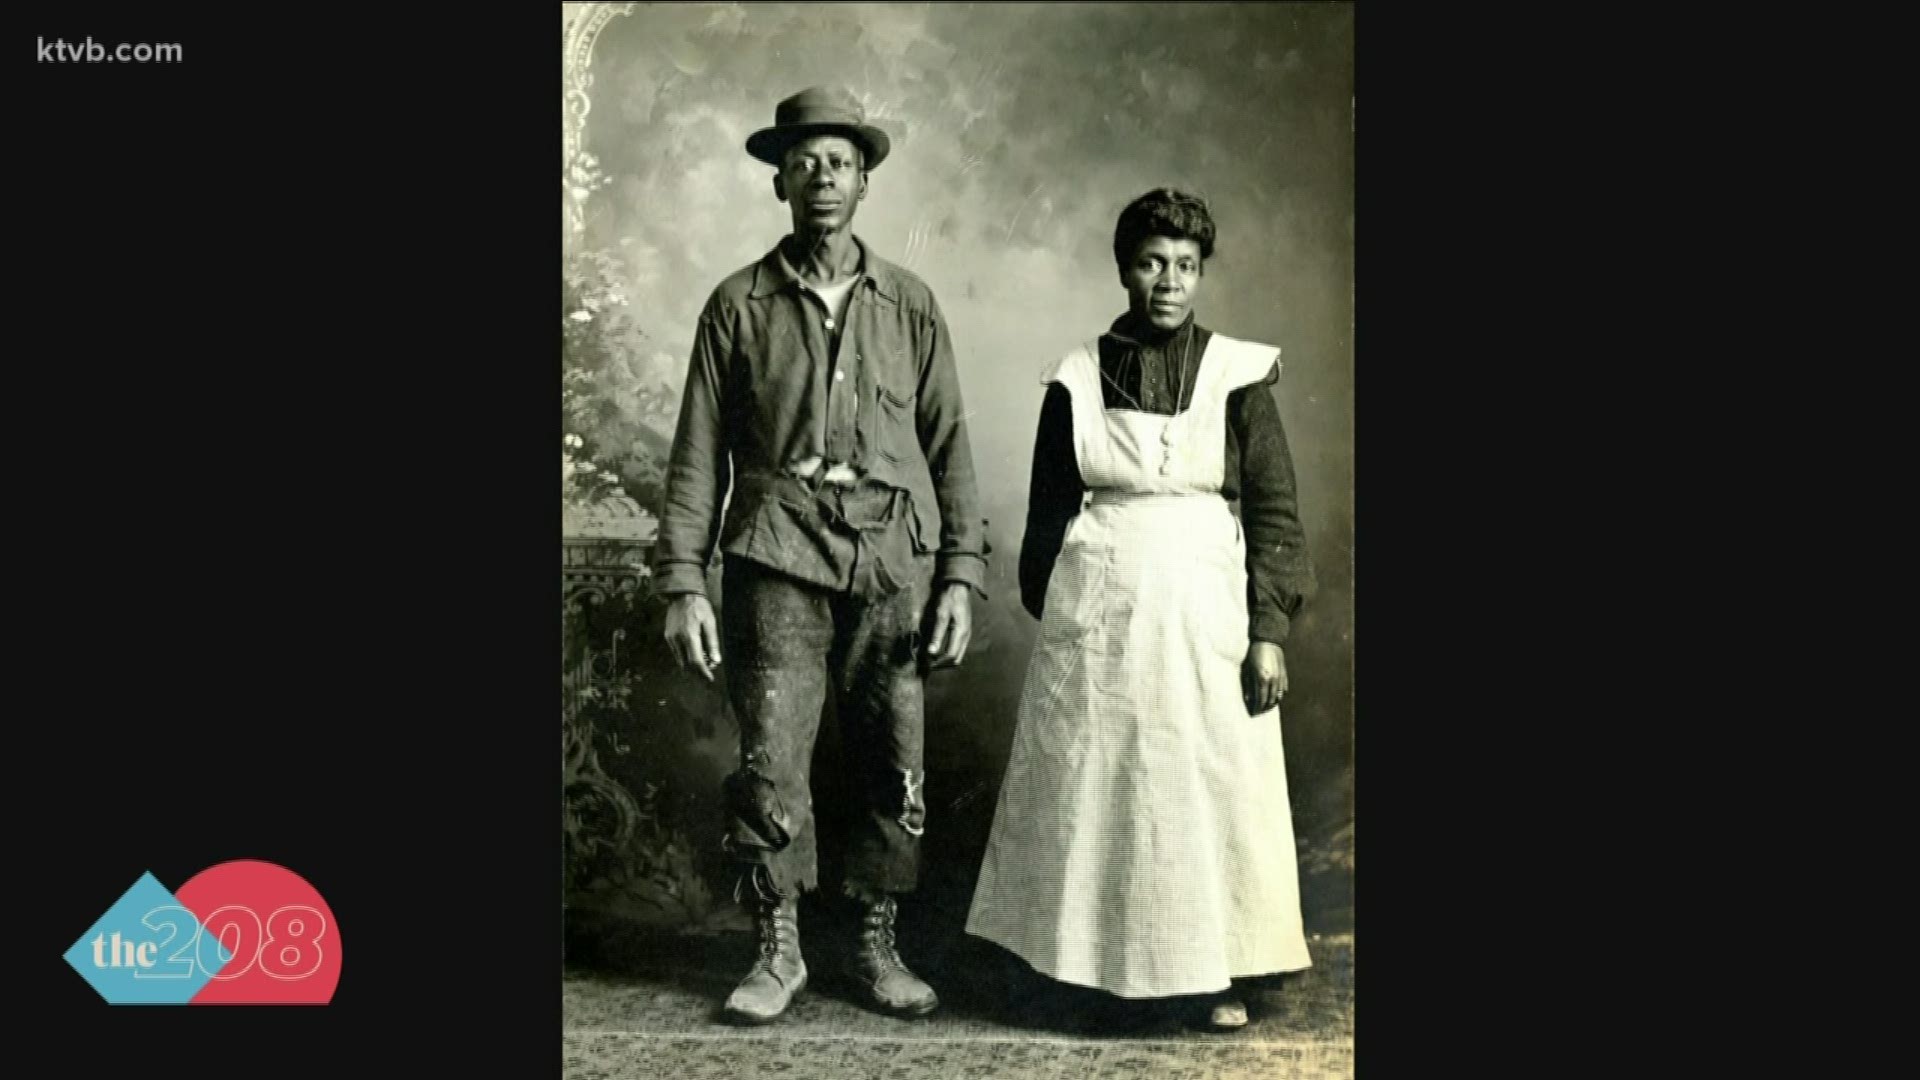 Joe and Lou Wells moved to the Idaho territory in 1889 and settled in an area that became the town of Deary.